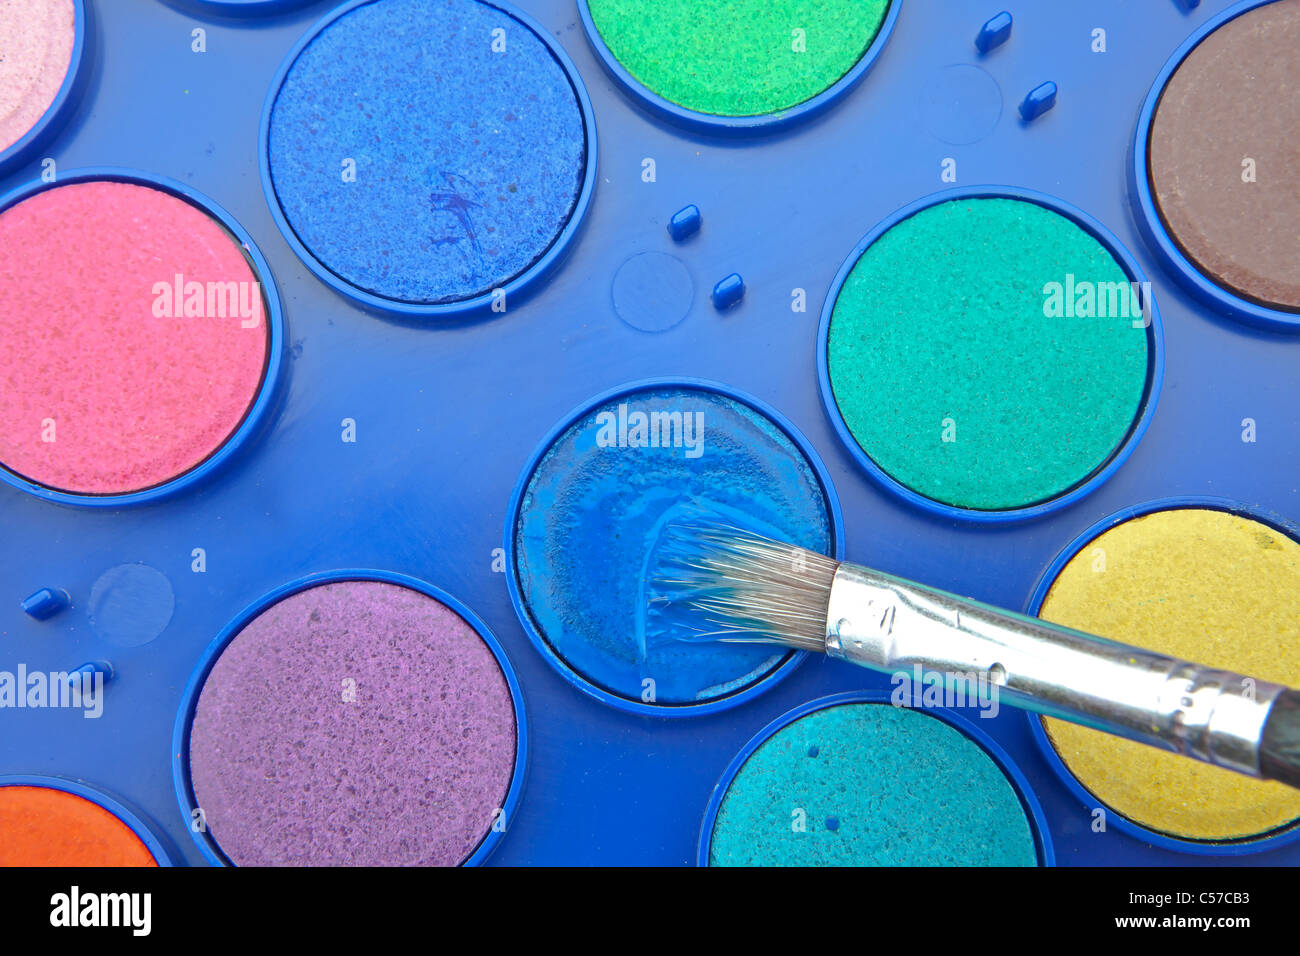 https://c8.alamy.com/comp/C57CB3/water-colors-in-a-paint-box-with-brush-C57CB3.jpg